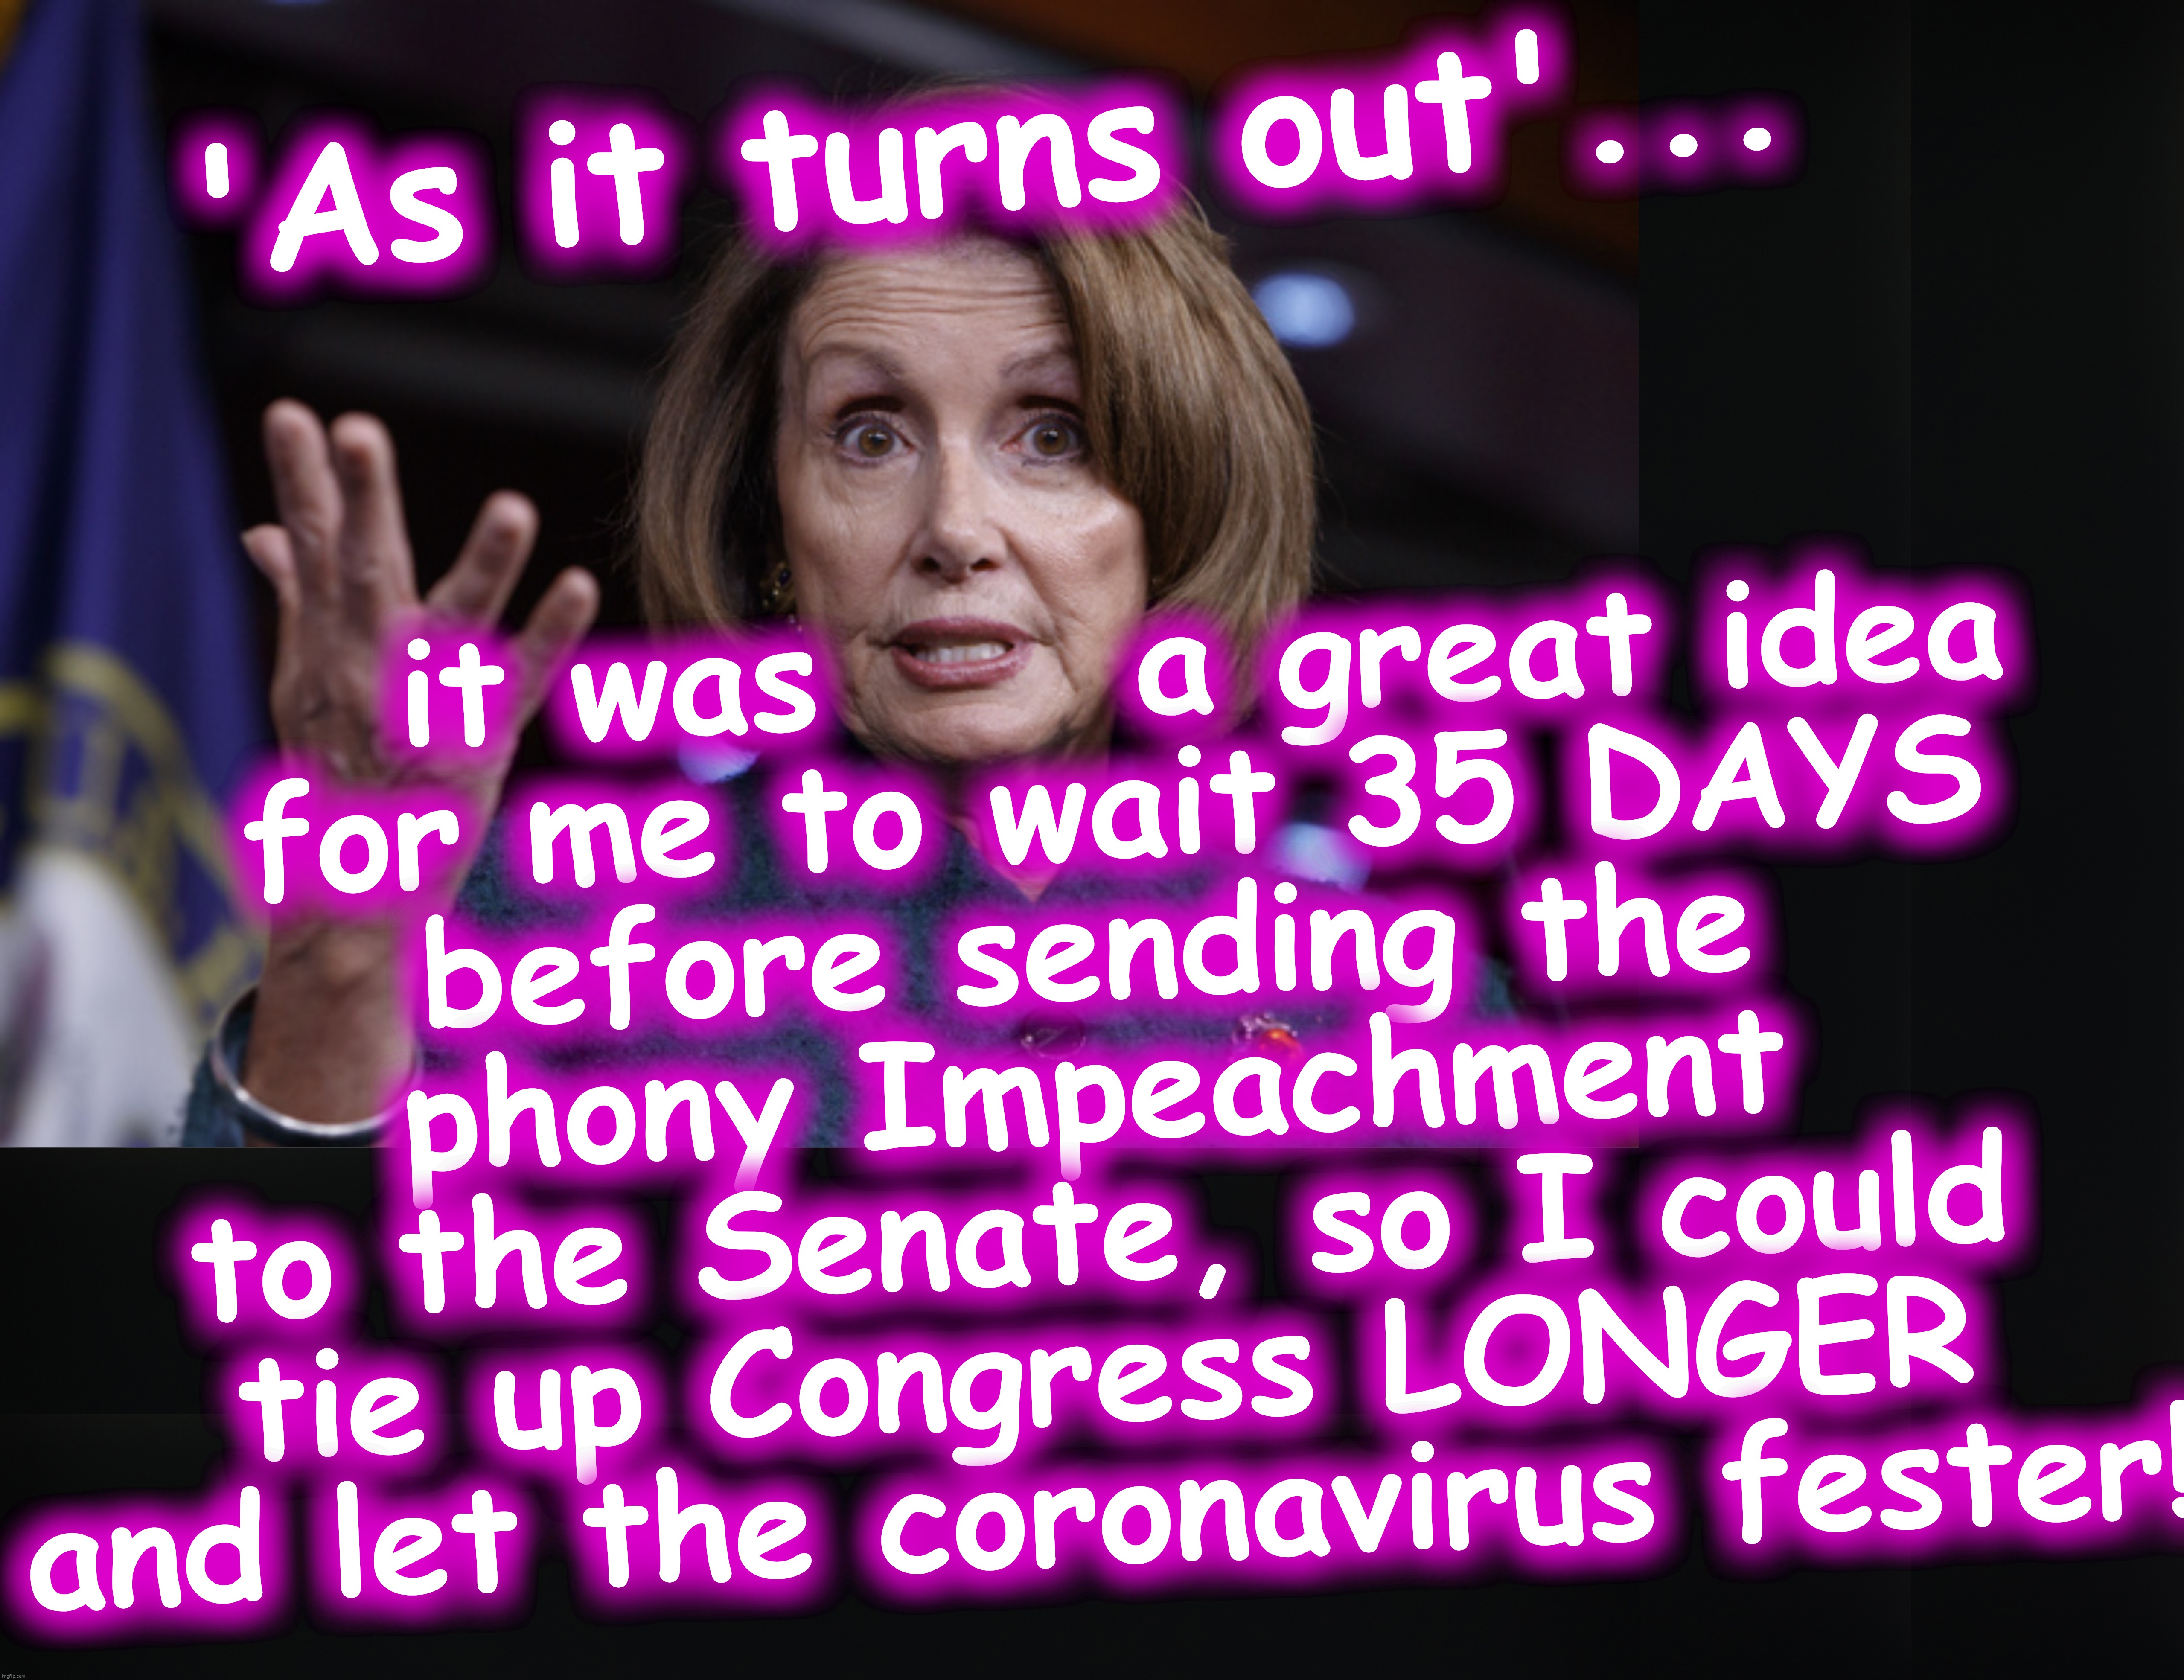 Is this the reason she waited 35 days? She wasn't talking about 'corona' then. | it was     a great idea
 for me to wait 35 DAYS
 before sending the 
phony Impeachment to the Senate, so I could tie up Congress LONGER and let the coronavirus fester! 'As it turns out'... | image tagged in good old nancy pelosi,coronavirus,covid-19,corona,impeachment,phony | made w/ Imgflip meme maker